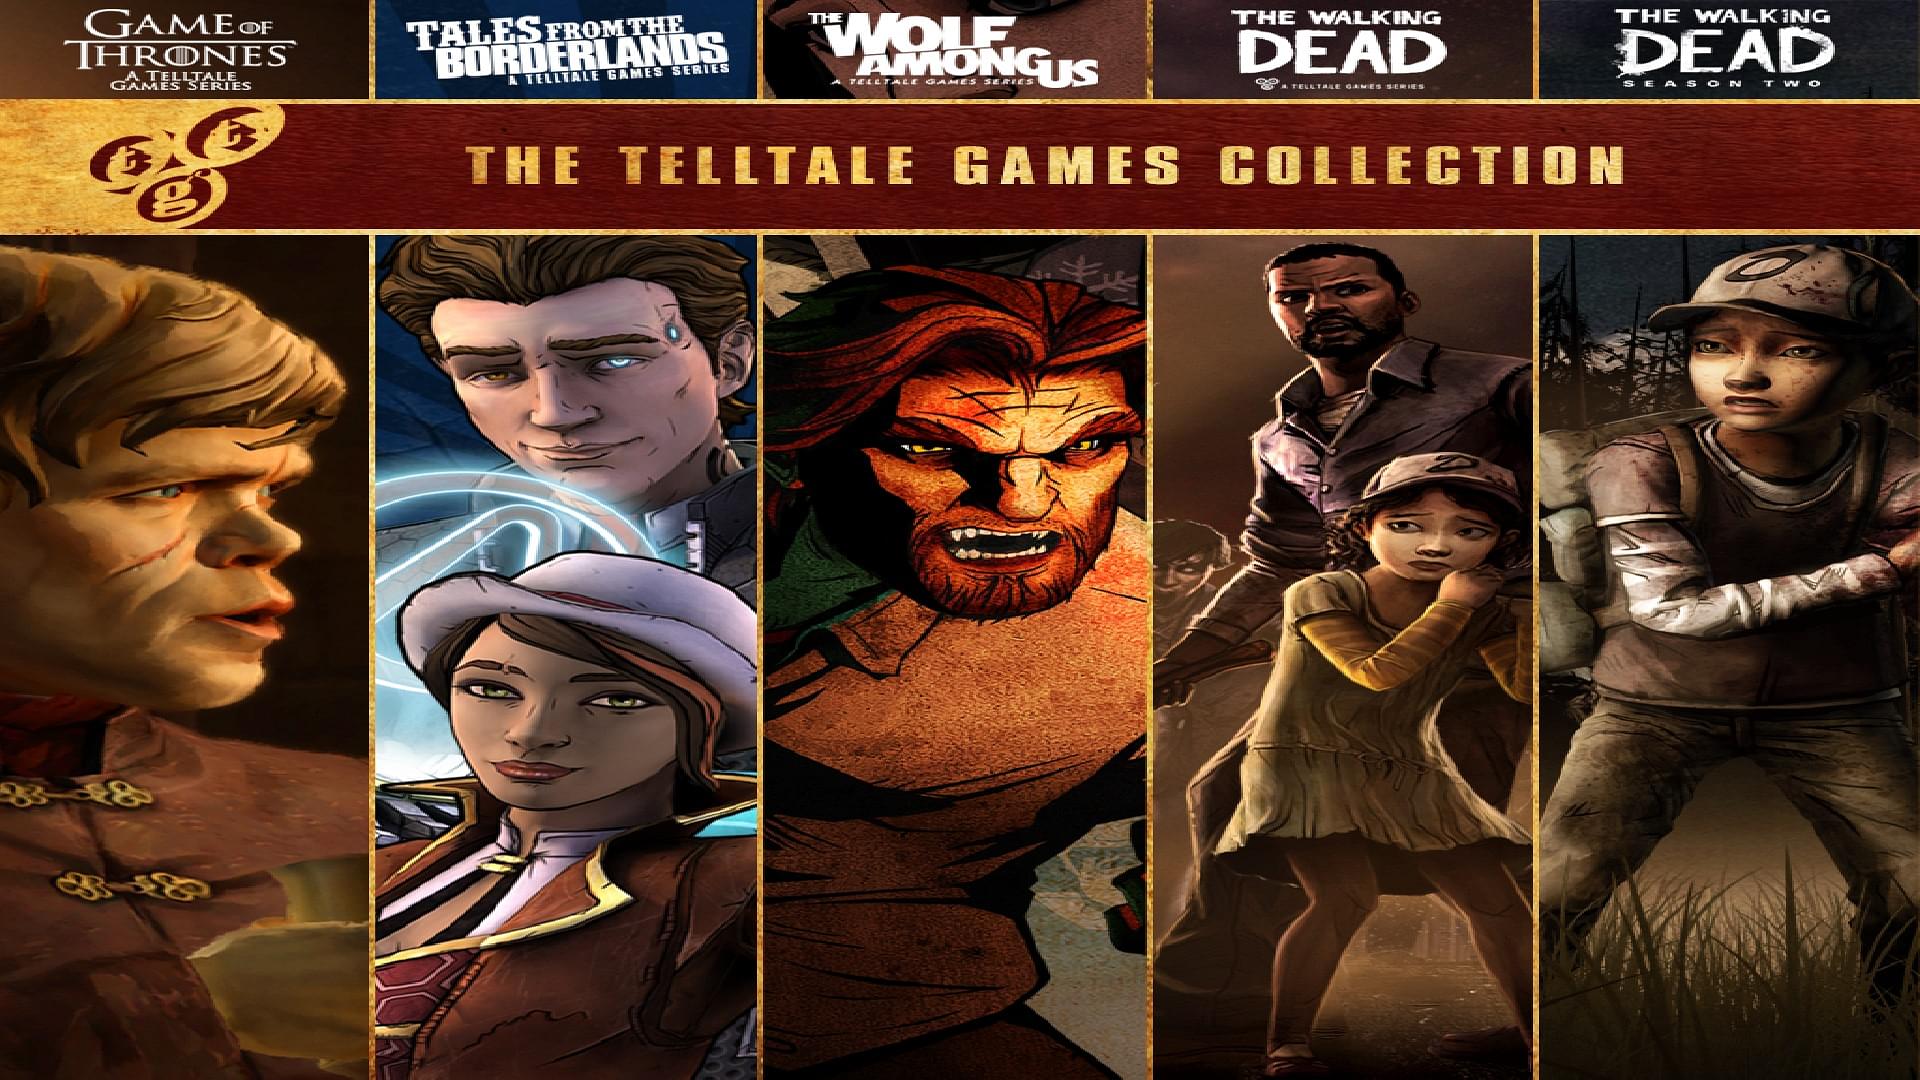 An image of multiple Telltale Games in one picture